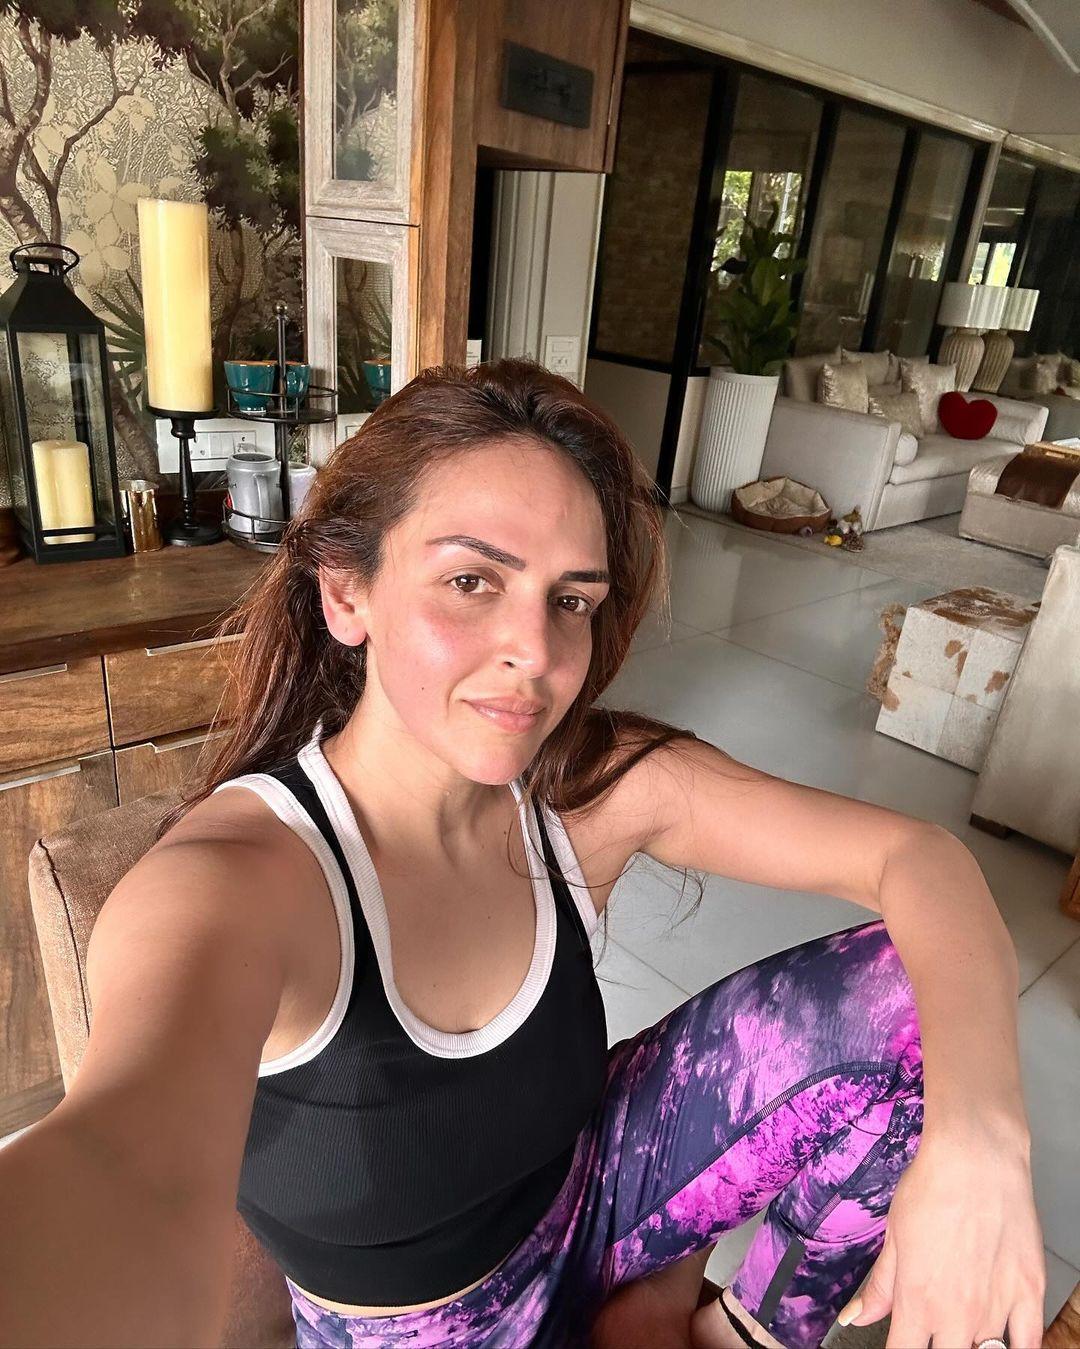 Esha has also been encouraging her followers to stick to their workout routines